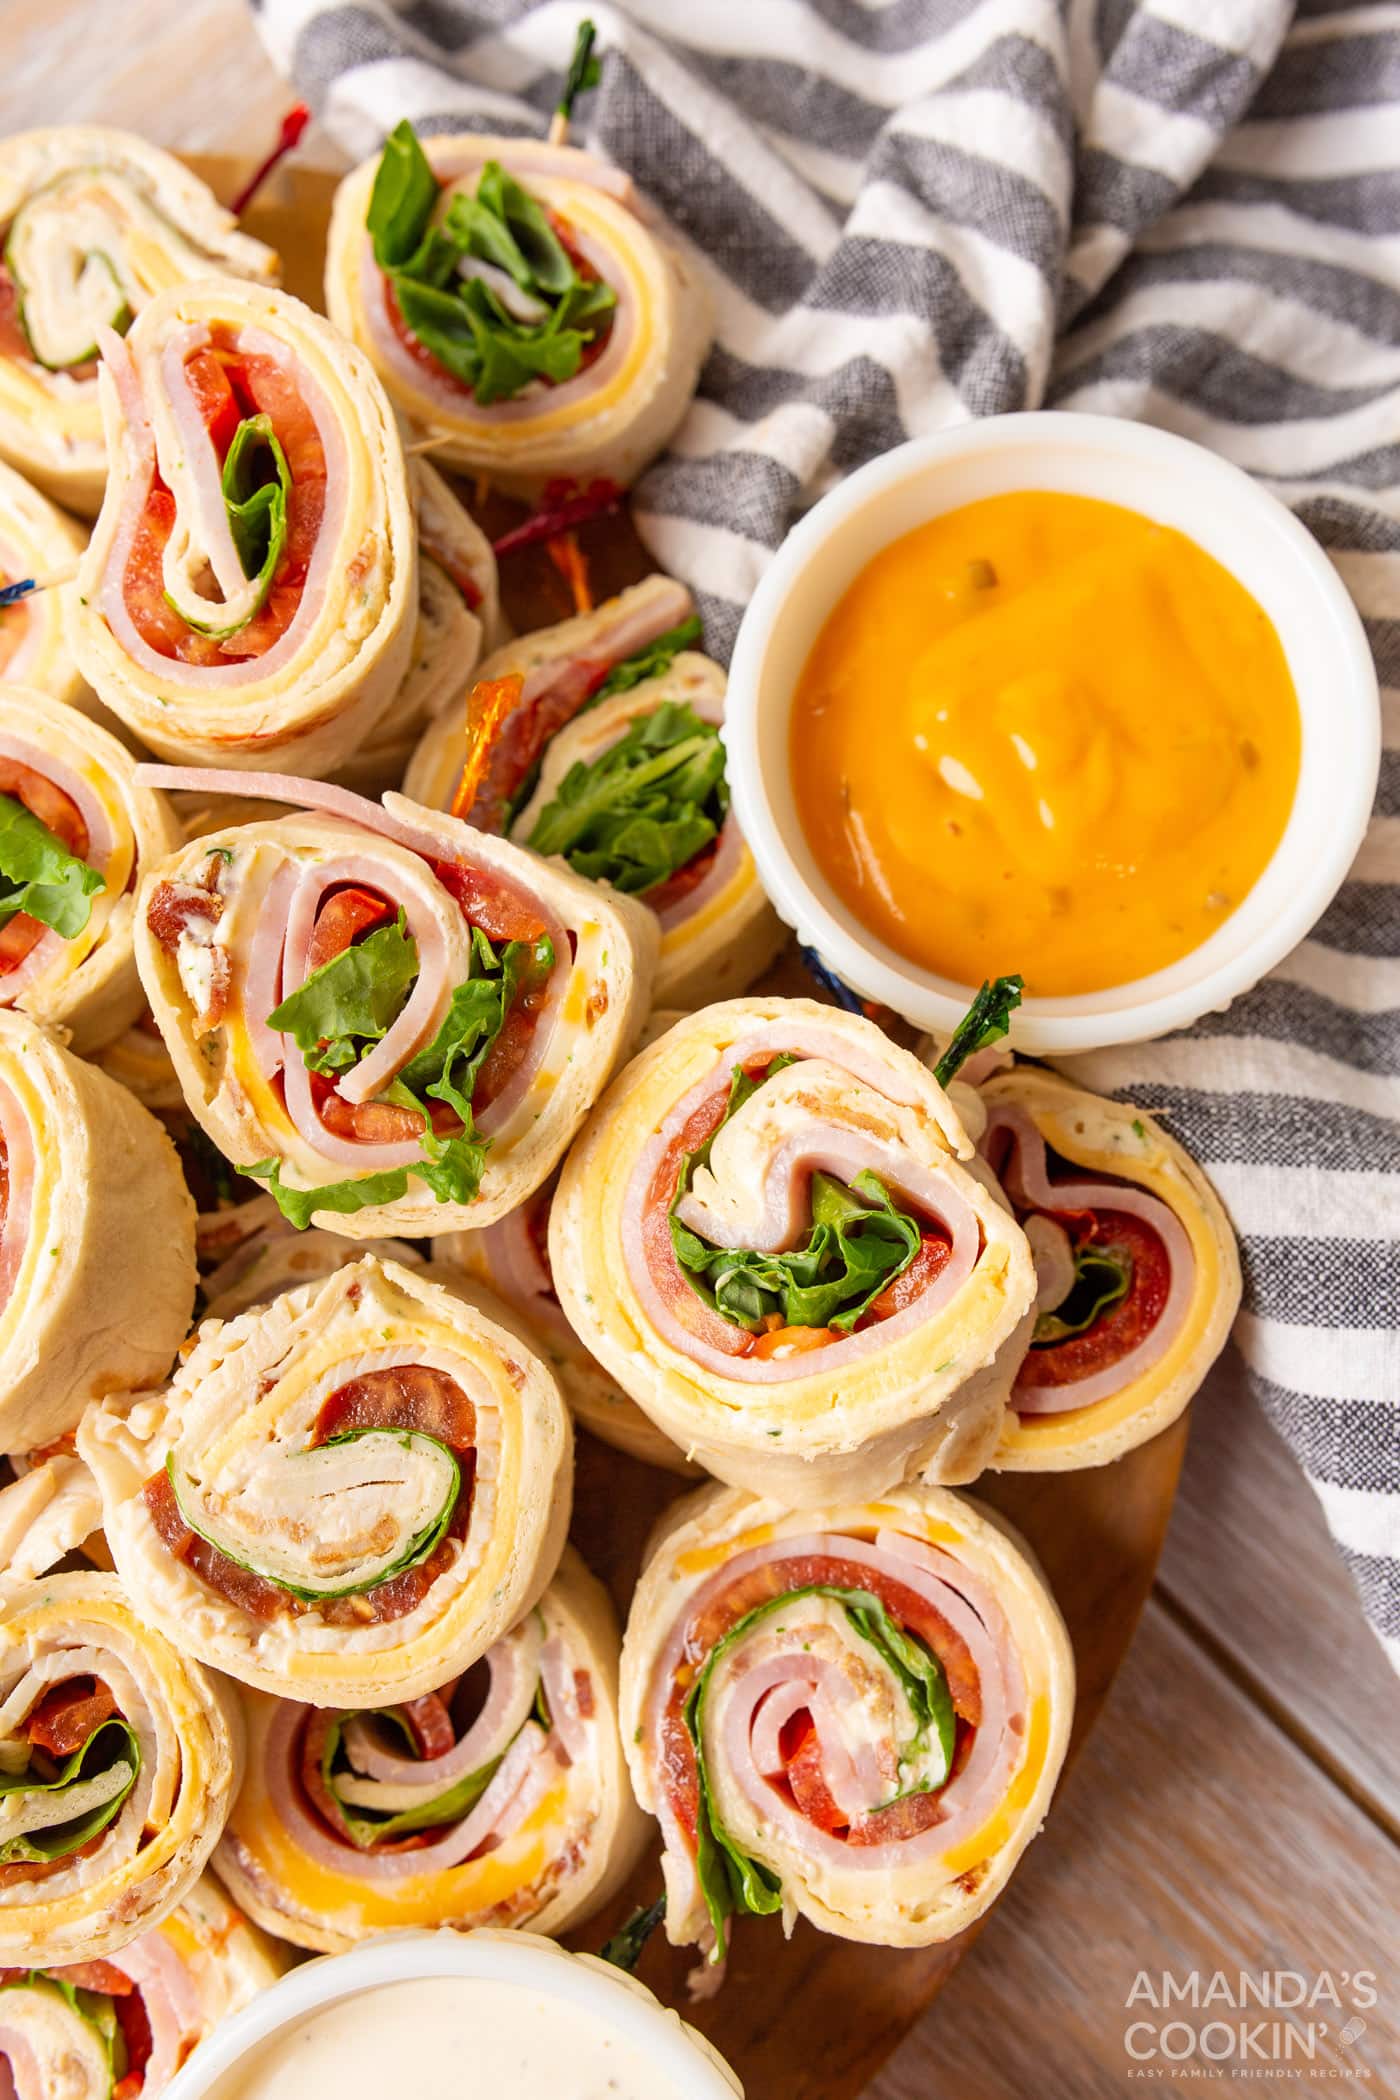 Pinwheel sandwiches on a wood background with a striped napkin.